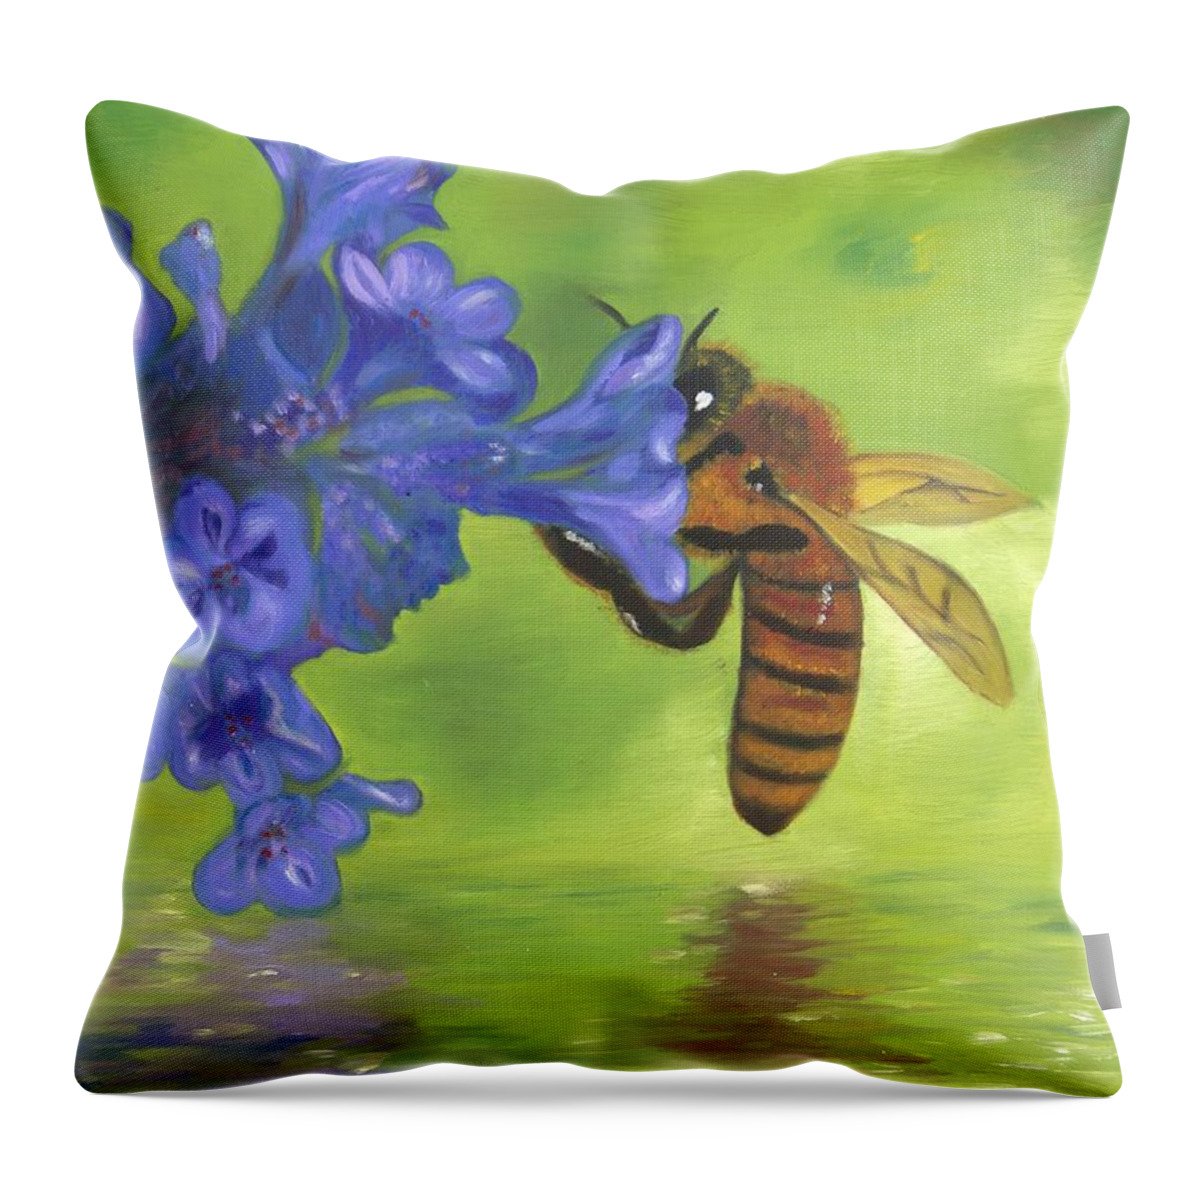 Bee Throw Pillow featuring the painting Nectar of Life - Honeybee by Neslihan Ergul Colley